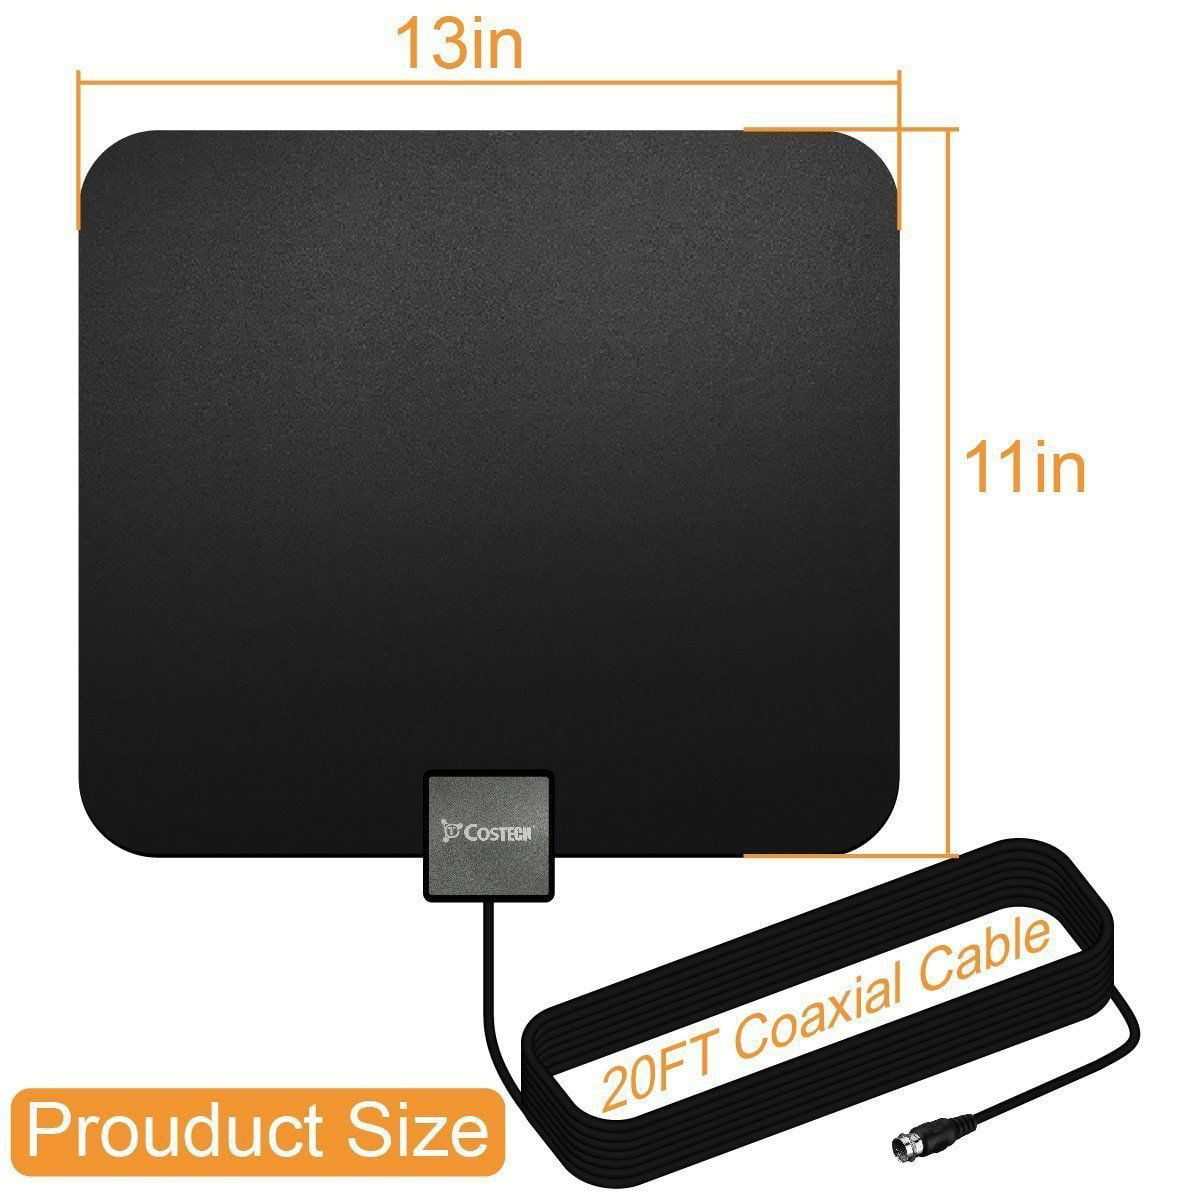 Tv Antenna Anko Indoor Amplified Hdtv Antenna With Detachable Signal Booster Ebay